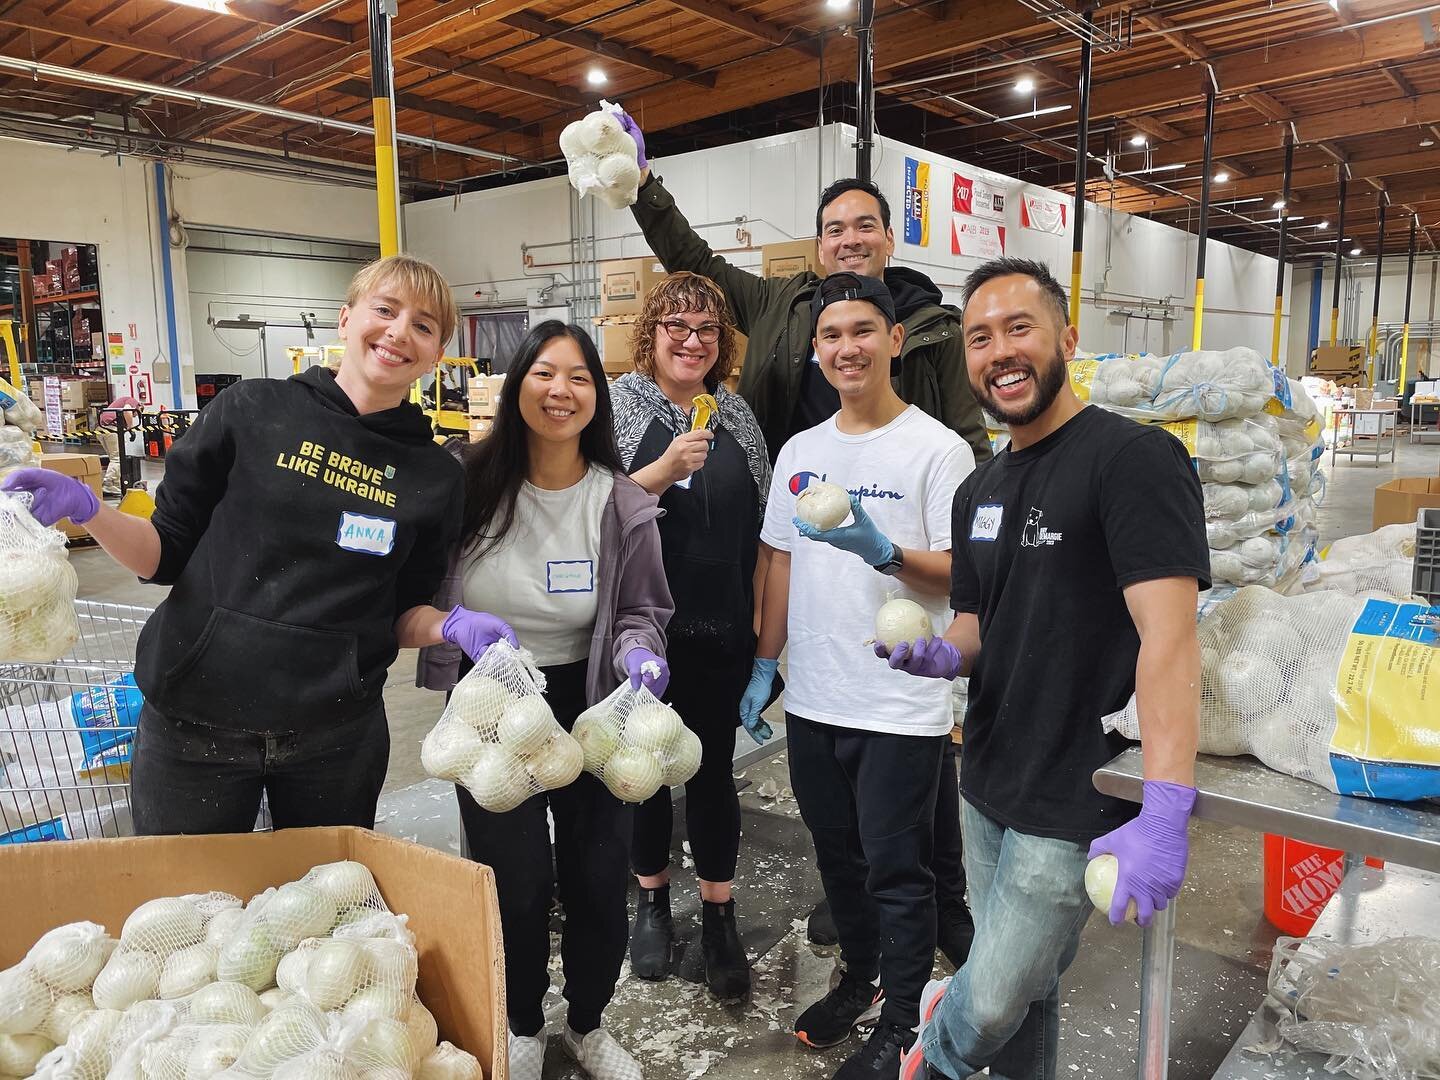 Productive day volunteering with the team at the Alameda Community Food Bank @accfb !! We had a blast sorting and packing onions with our friends, Anna and Paula 🫶🏼

About 1 in 4 households struggle with food and groceries. If you&rsquo;re ever int